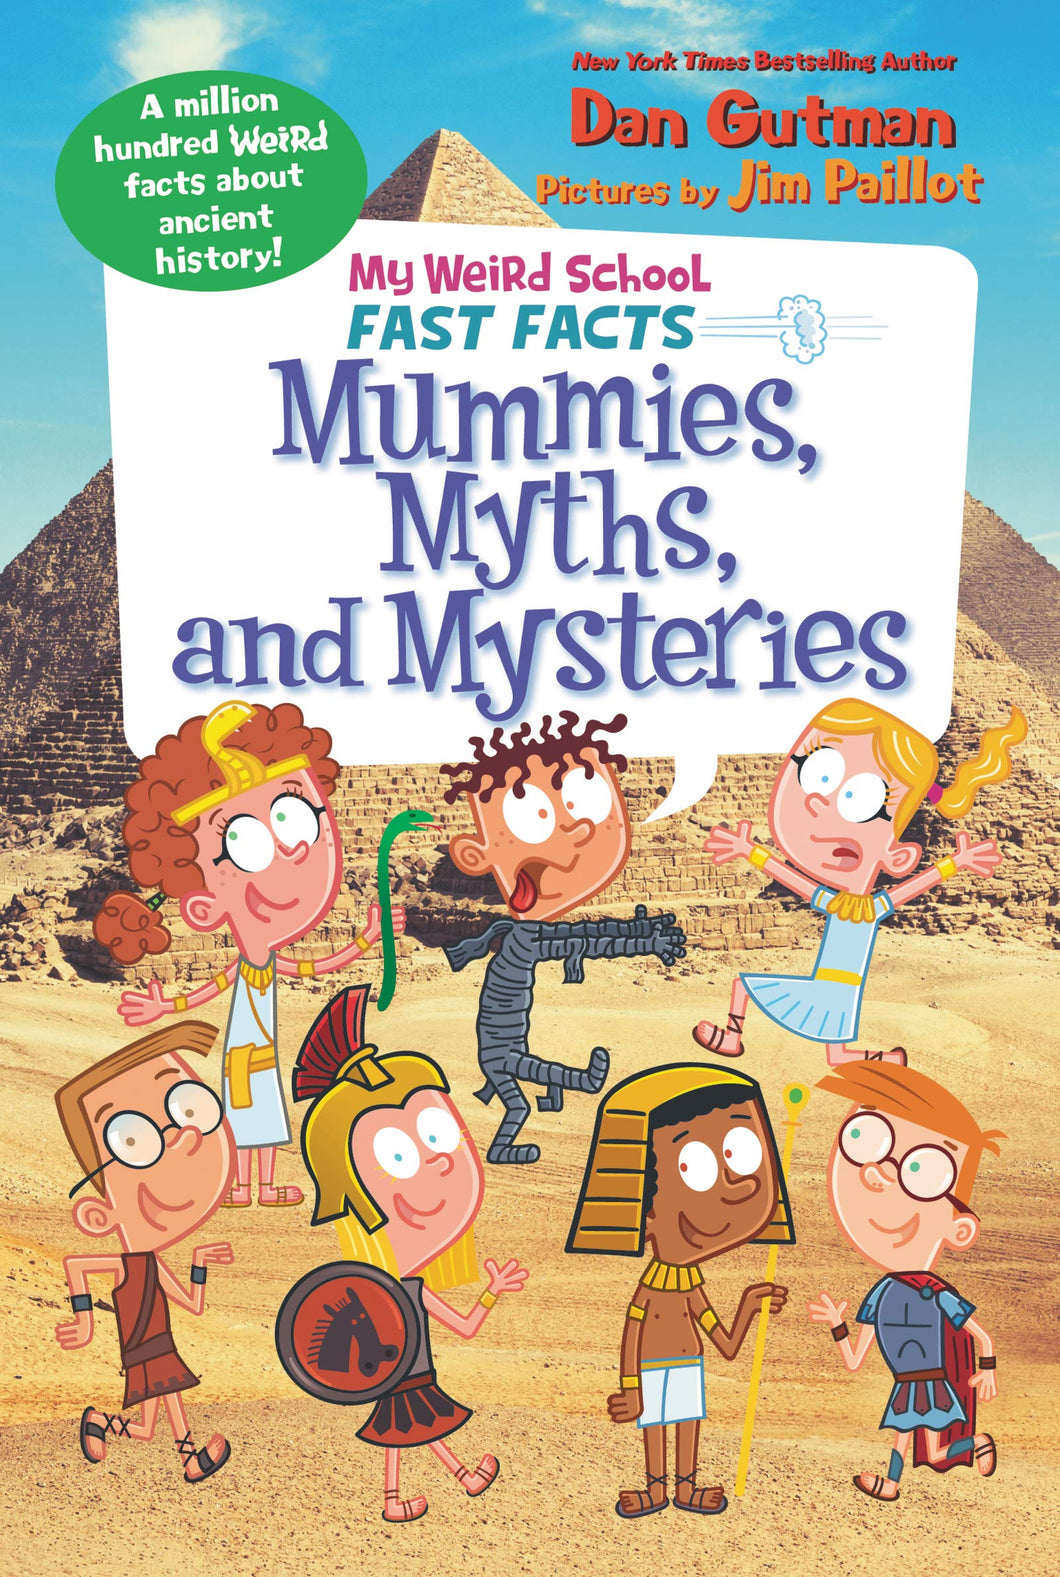 My Weird School Fast Facts: Mummies, Myths, and Mysteries